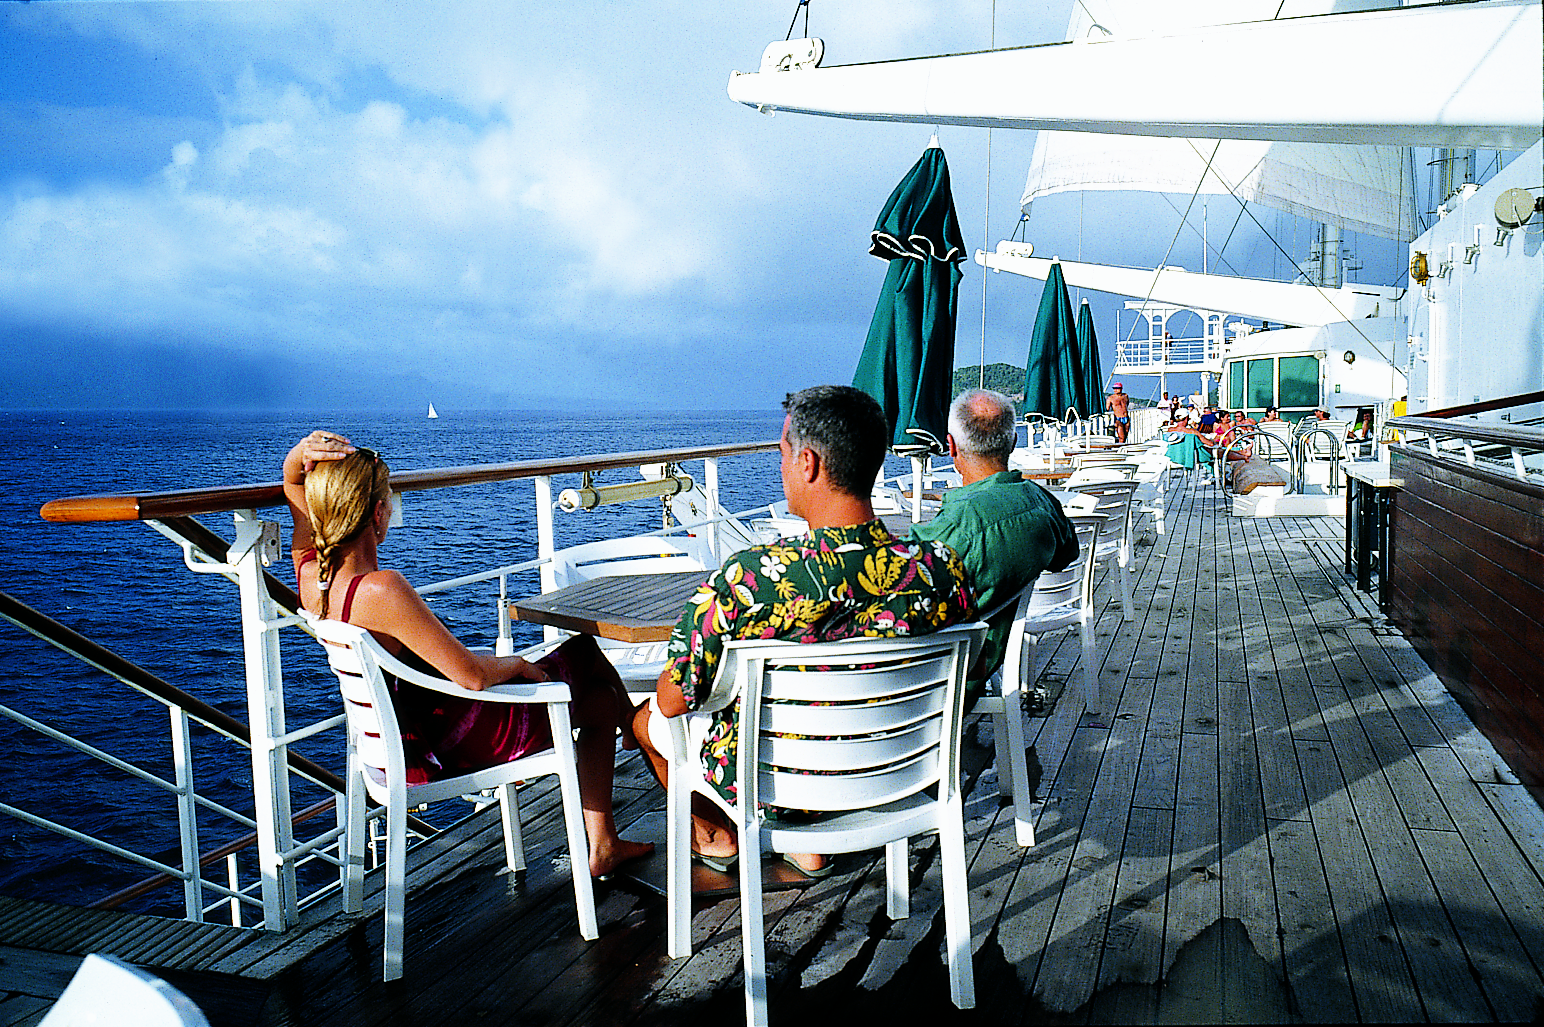 Windstar: A different kind of luxury cruise